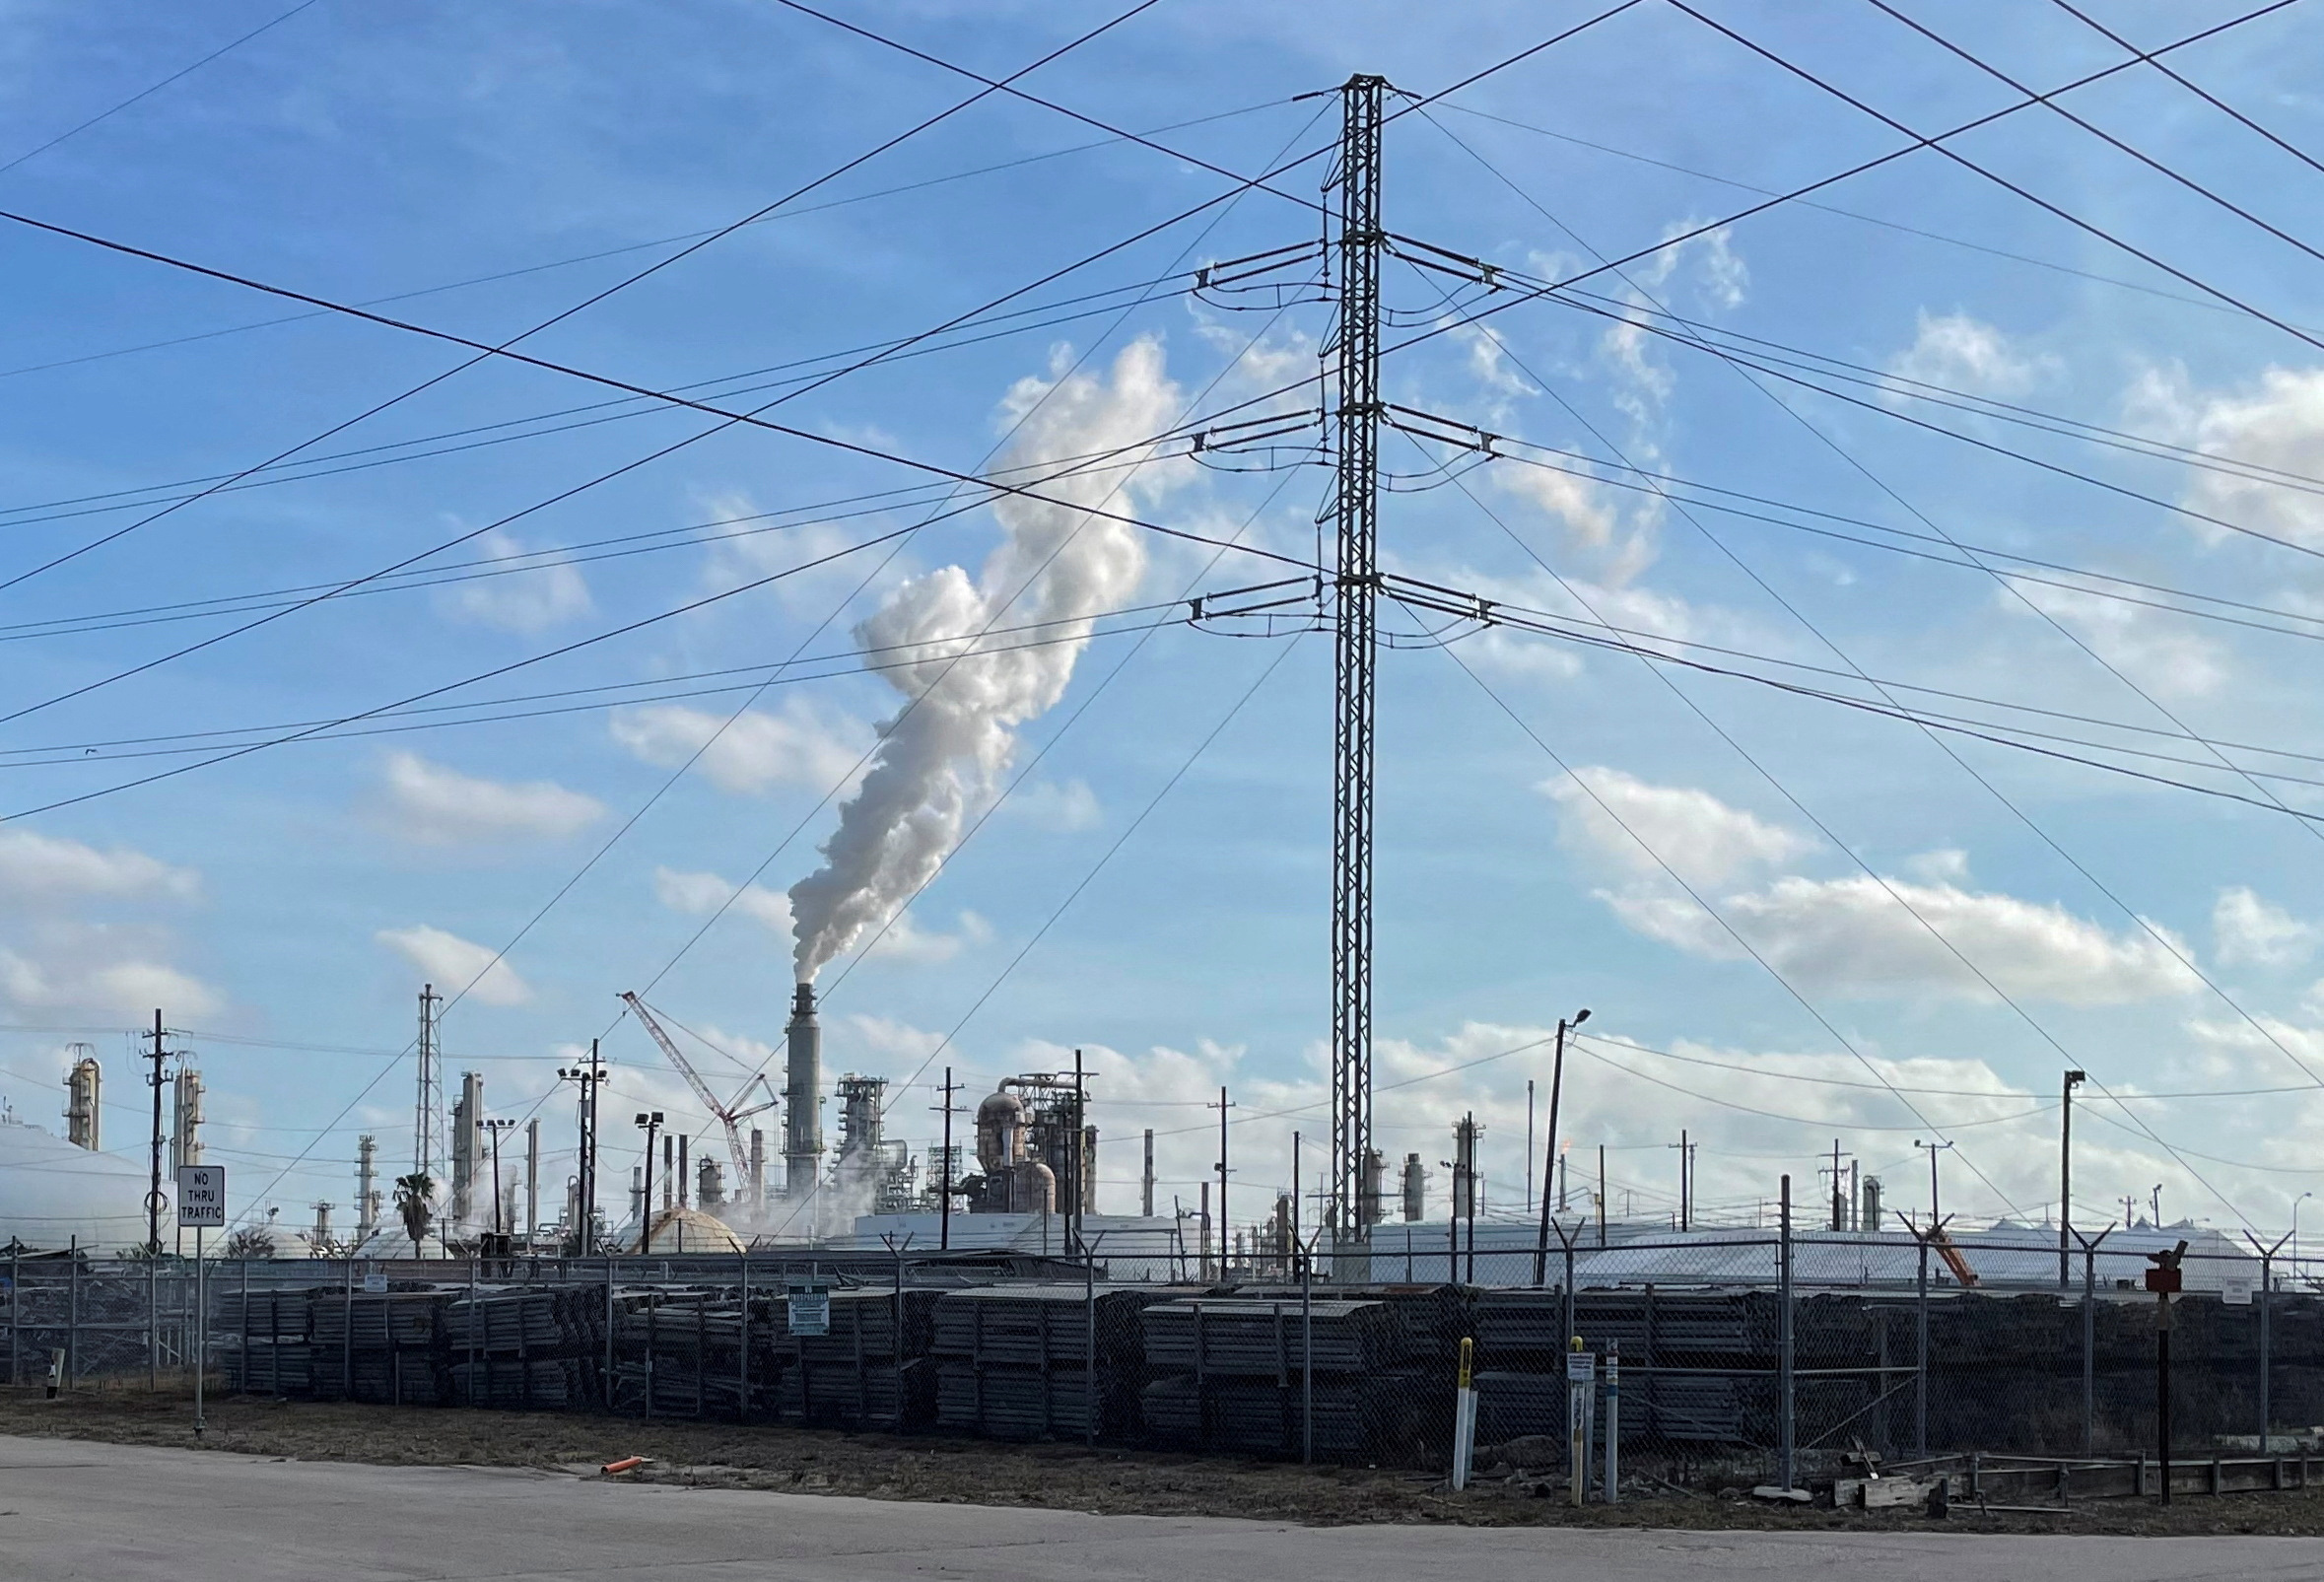 Production units are seen in operation at Marathon Petroleum’s Galveston Bay Refinery in Texas City